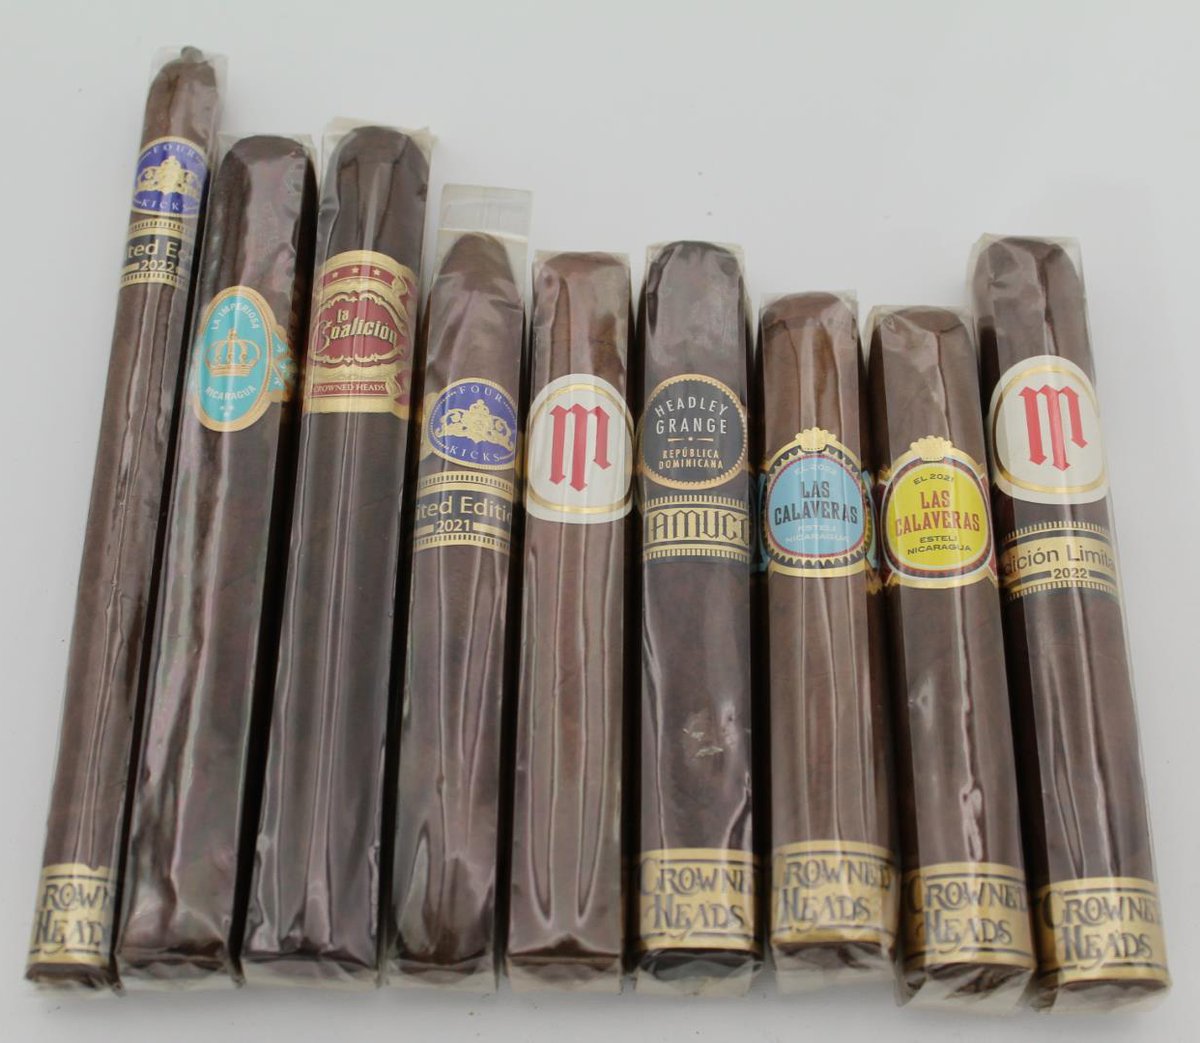 LOTS OF COOL SAMPLERS AVAILABLE right now on the site:

shouldismokethis.com/product-catego…

#ShouldISmokeThis #cigars #botl #CigarLife #SmokeWhatYouLike #blessed